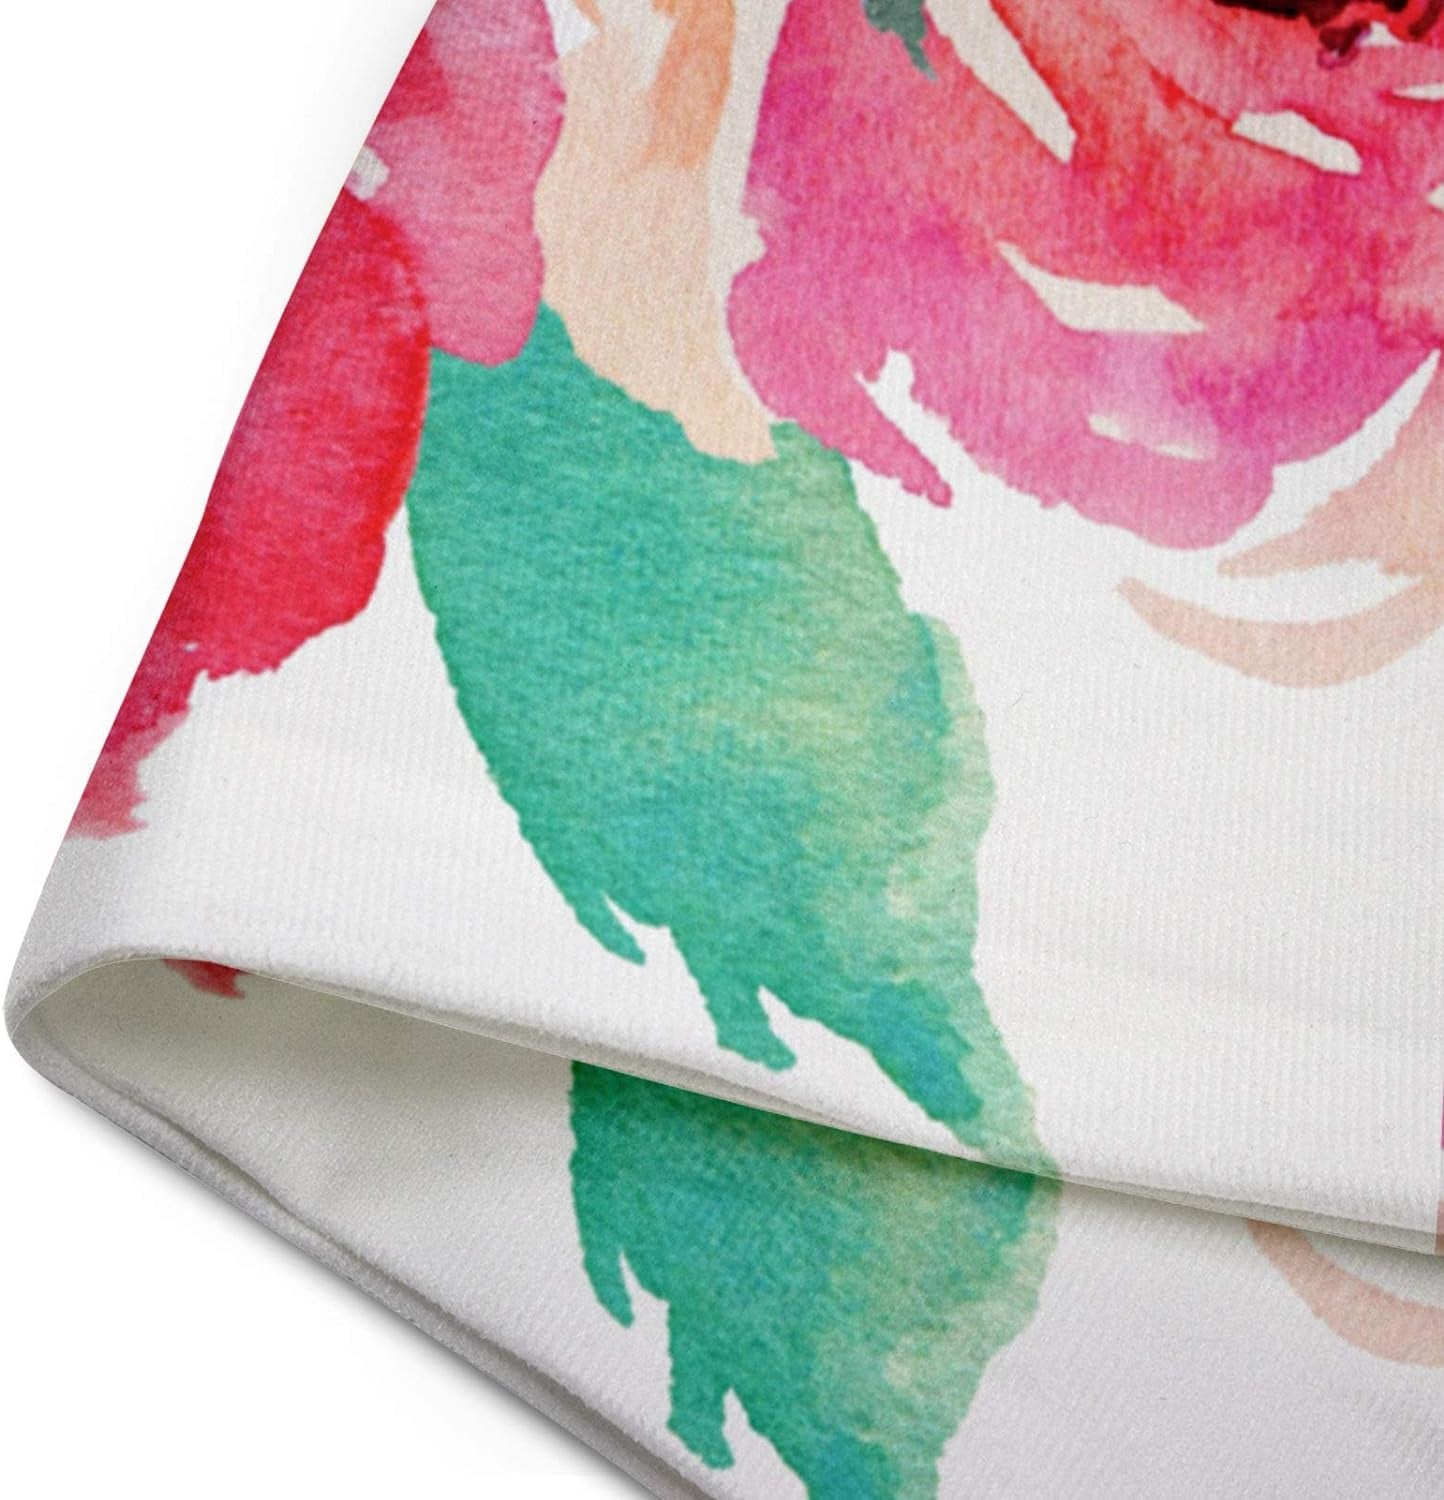 Emvency Throw Pillow Cover Watercolor Peonies Pink Turquoise Summer Bouquet Decorative Pillow Case Girly Home Decor Square 18 X 18 Inch Cushion Pillowcase